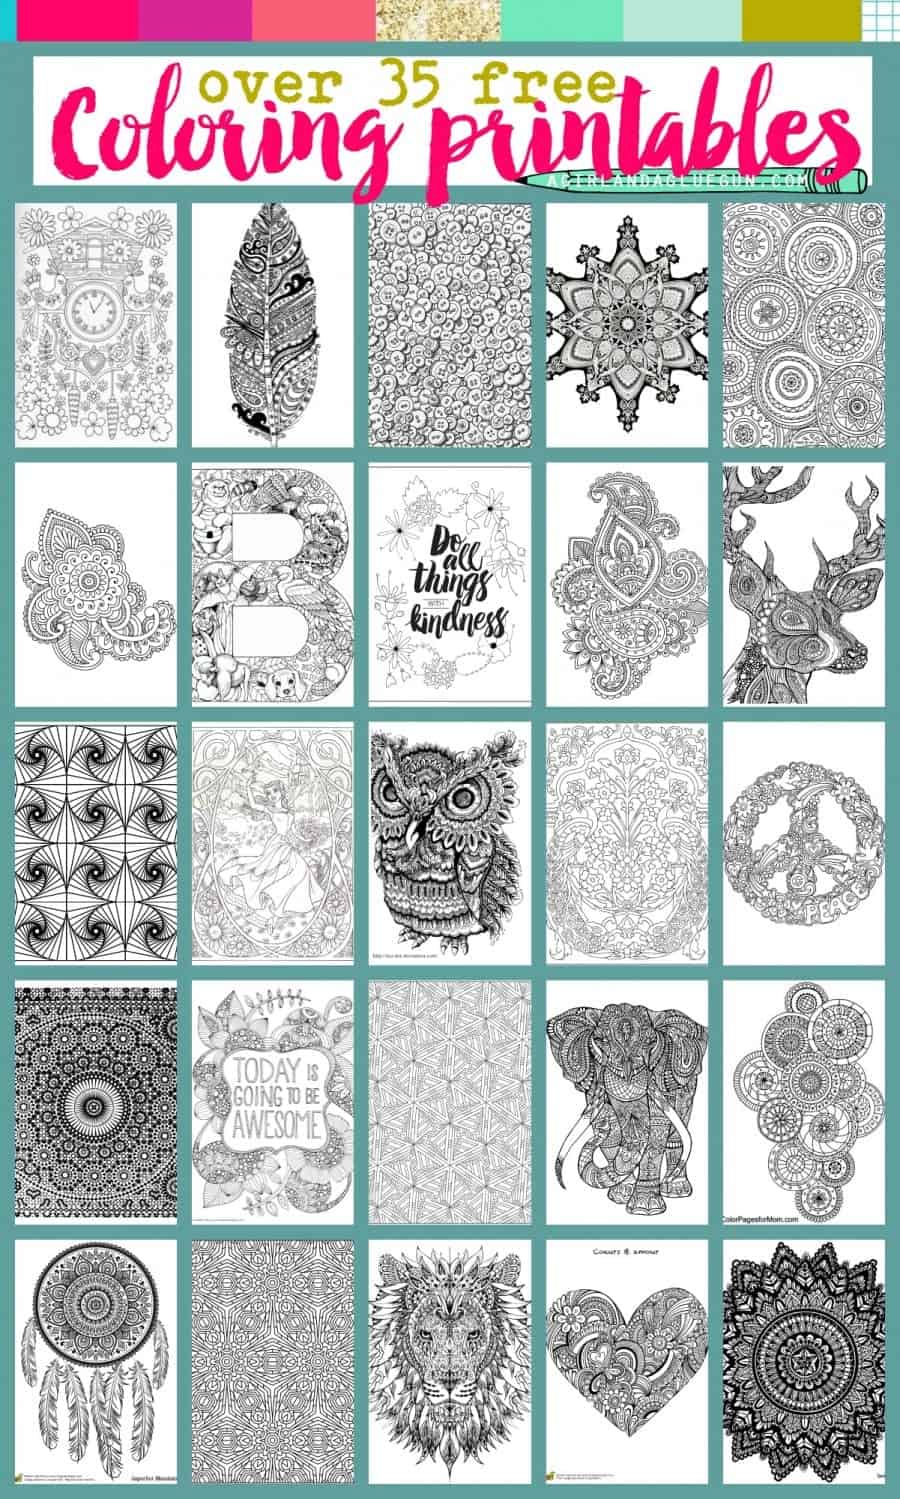 35 free coloring printables for adult coloring. Awesome prints and pages